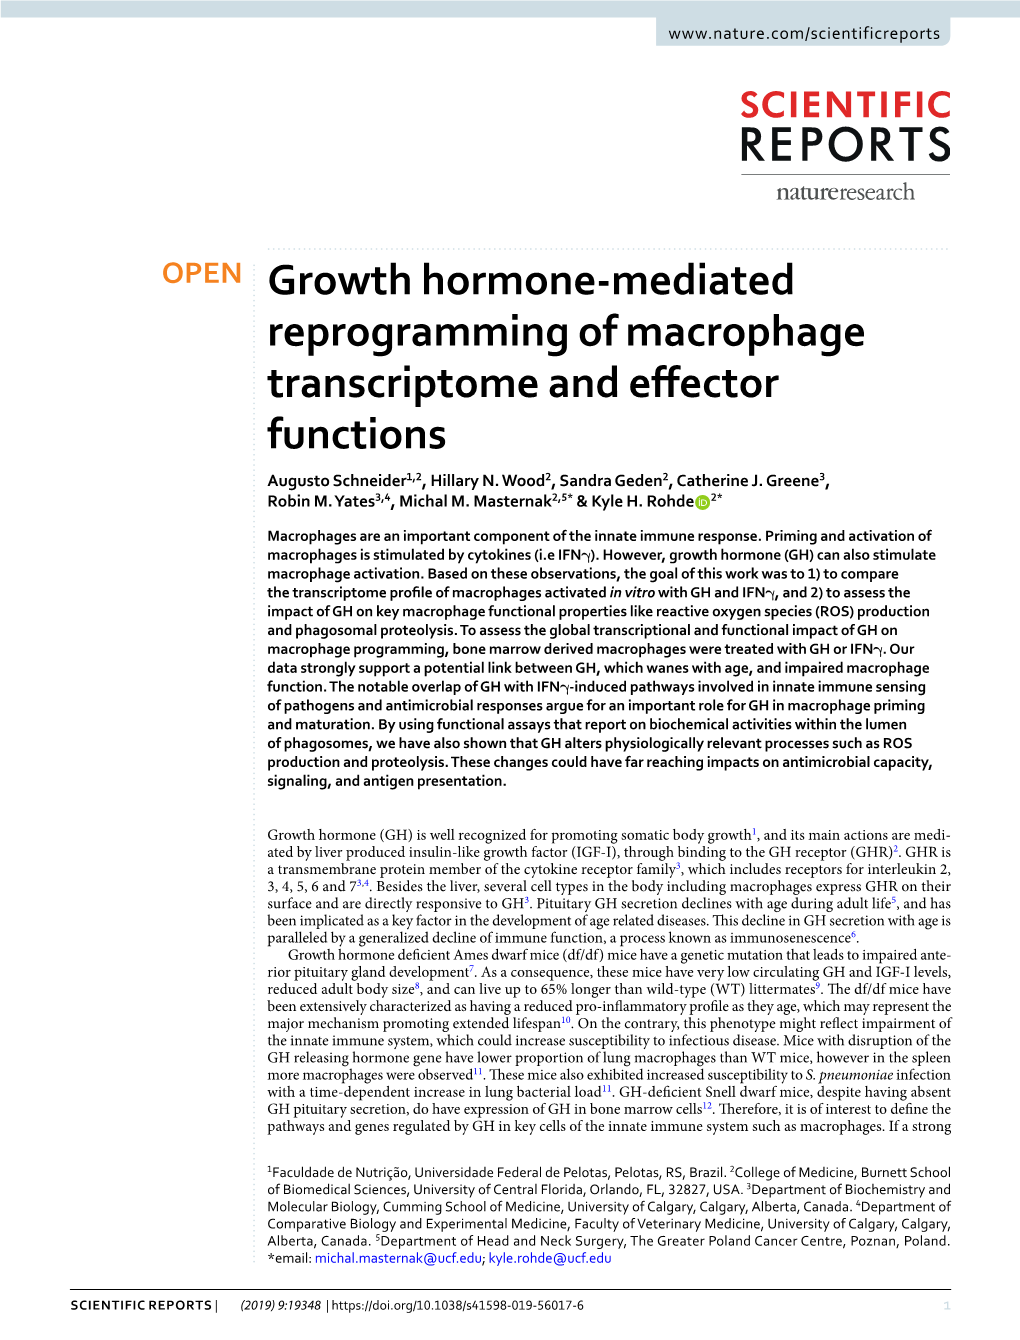 Growth Hormone-Mediated Reprogramming of Macrophage Transcriptome and Efector Functions Augusto Schneider1,2, Hillary N